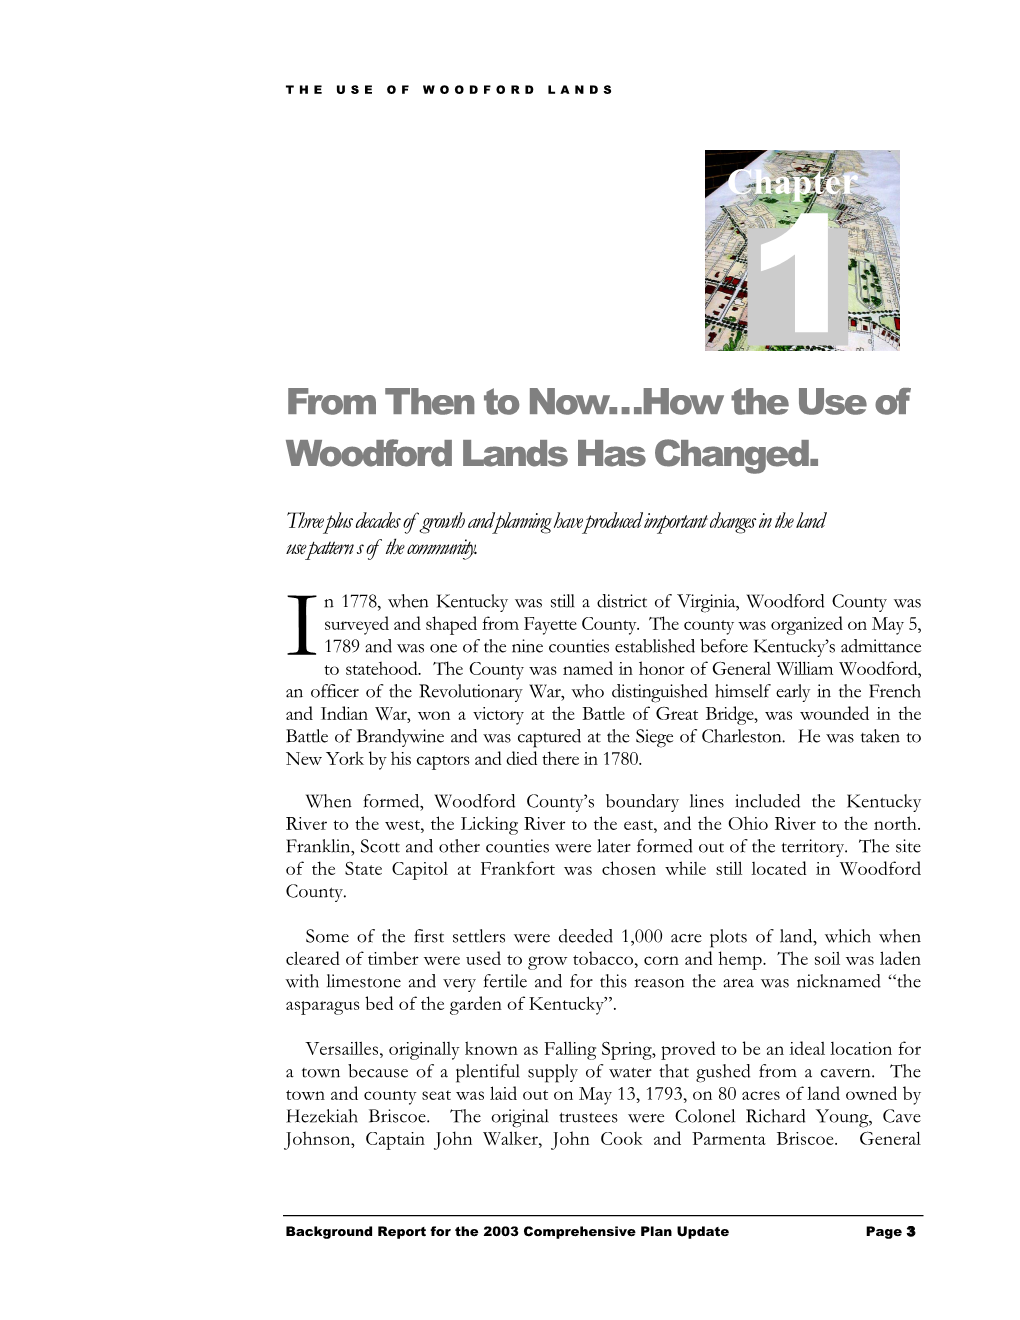 How the Use of Woodford Lands Has Changed. 1Chapter